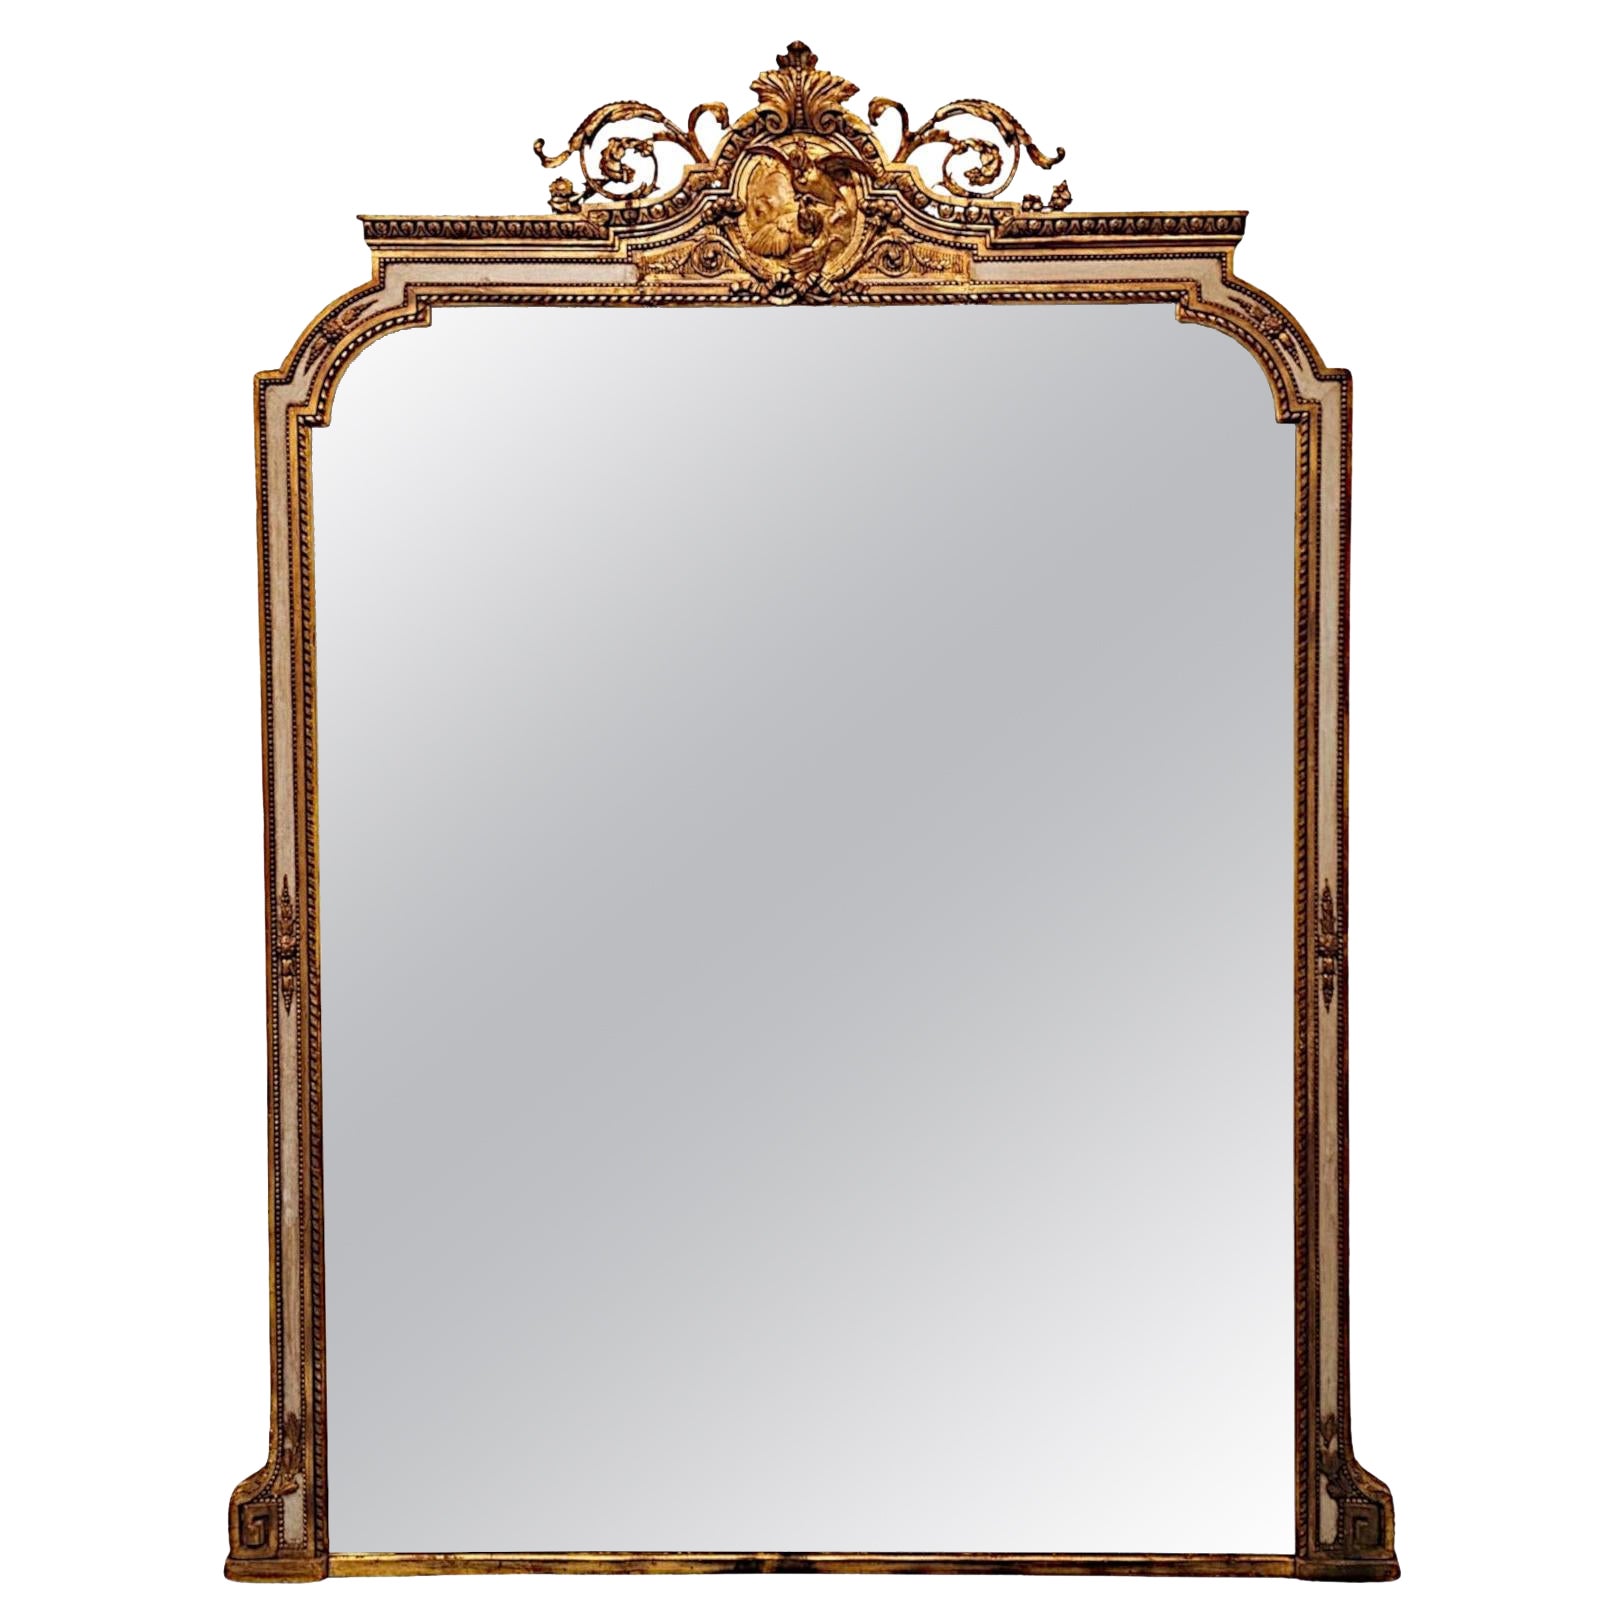 An Exceptionally Rare 19th Century Giltwood Mirror by 'Lamb of Manchester' For Sale